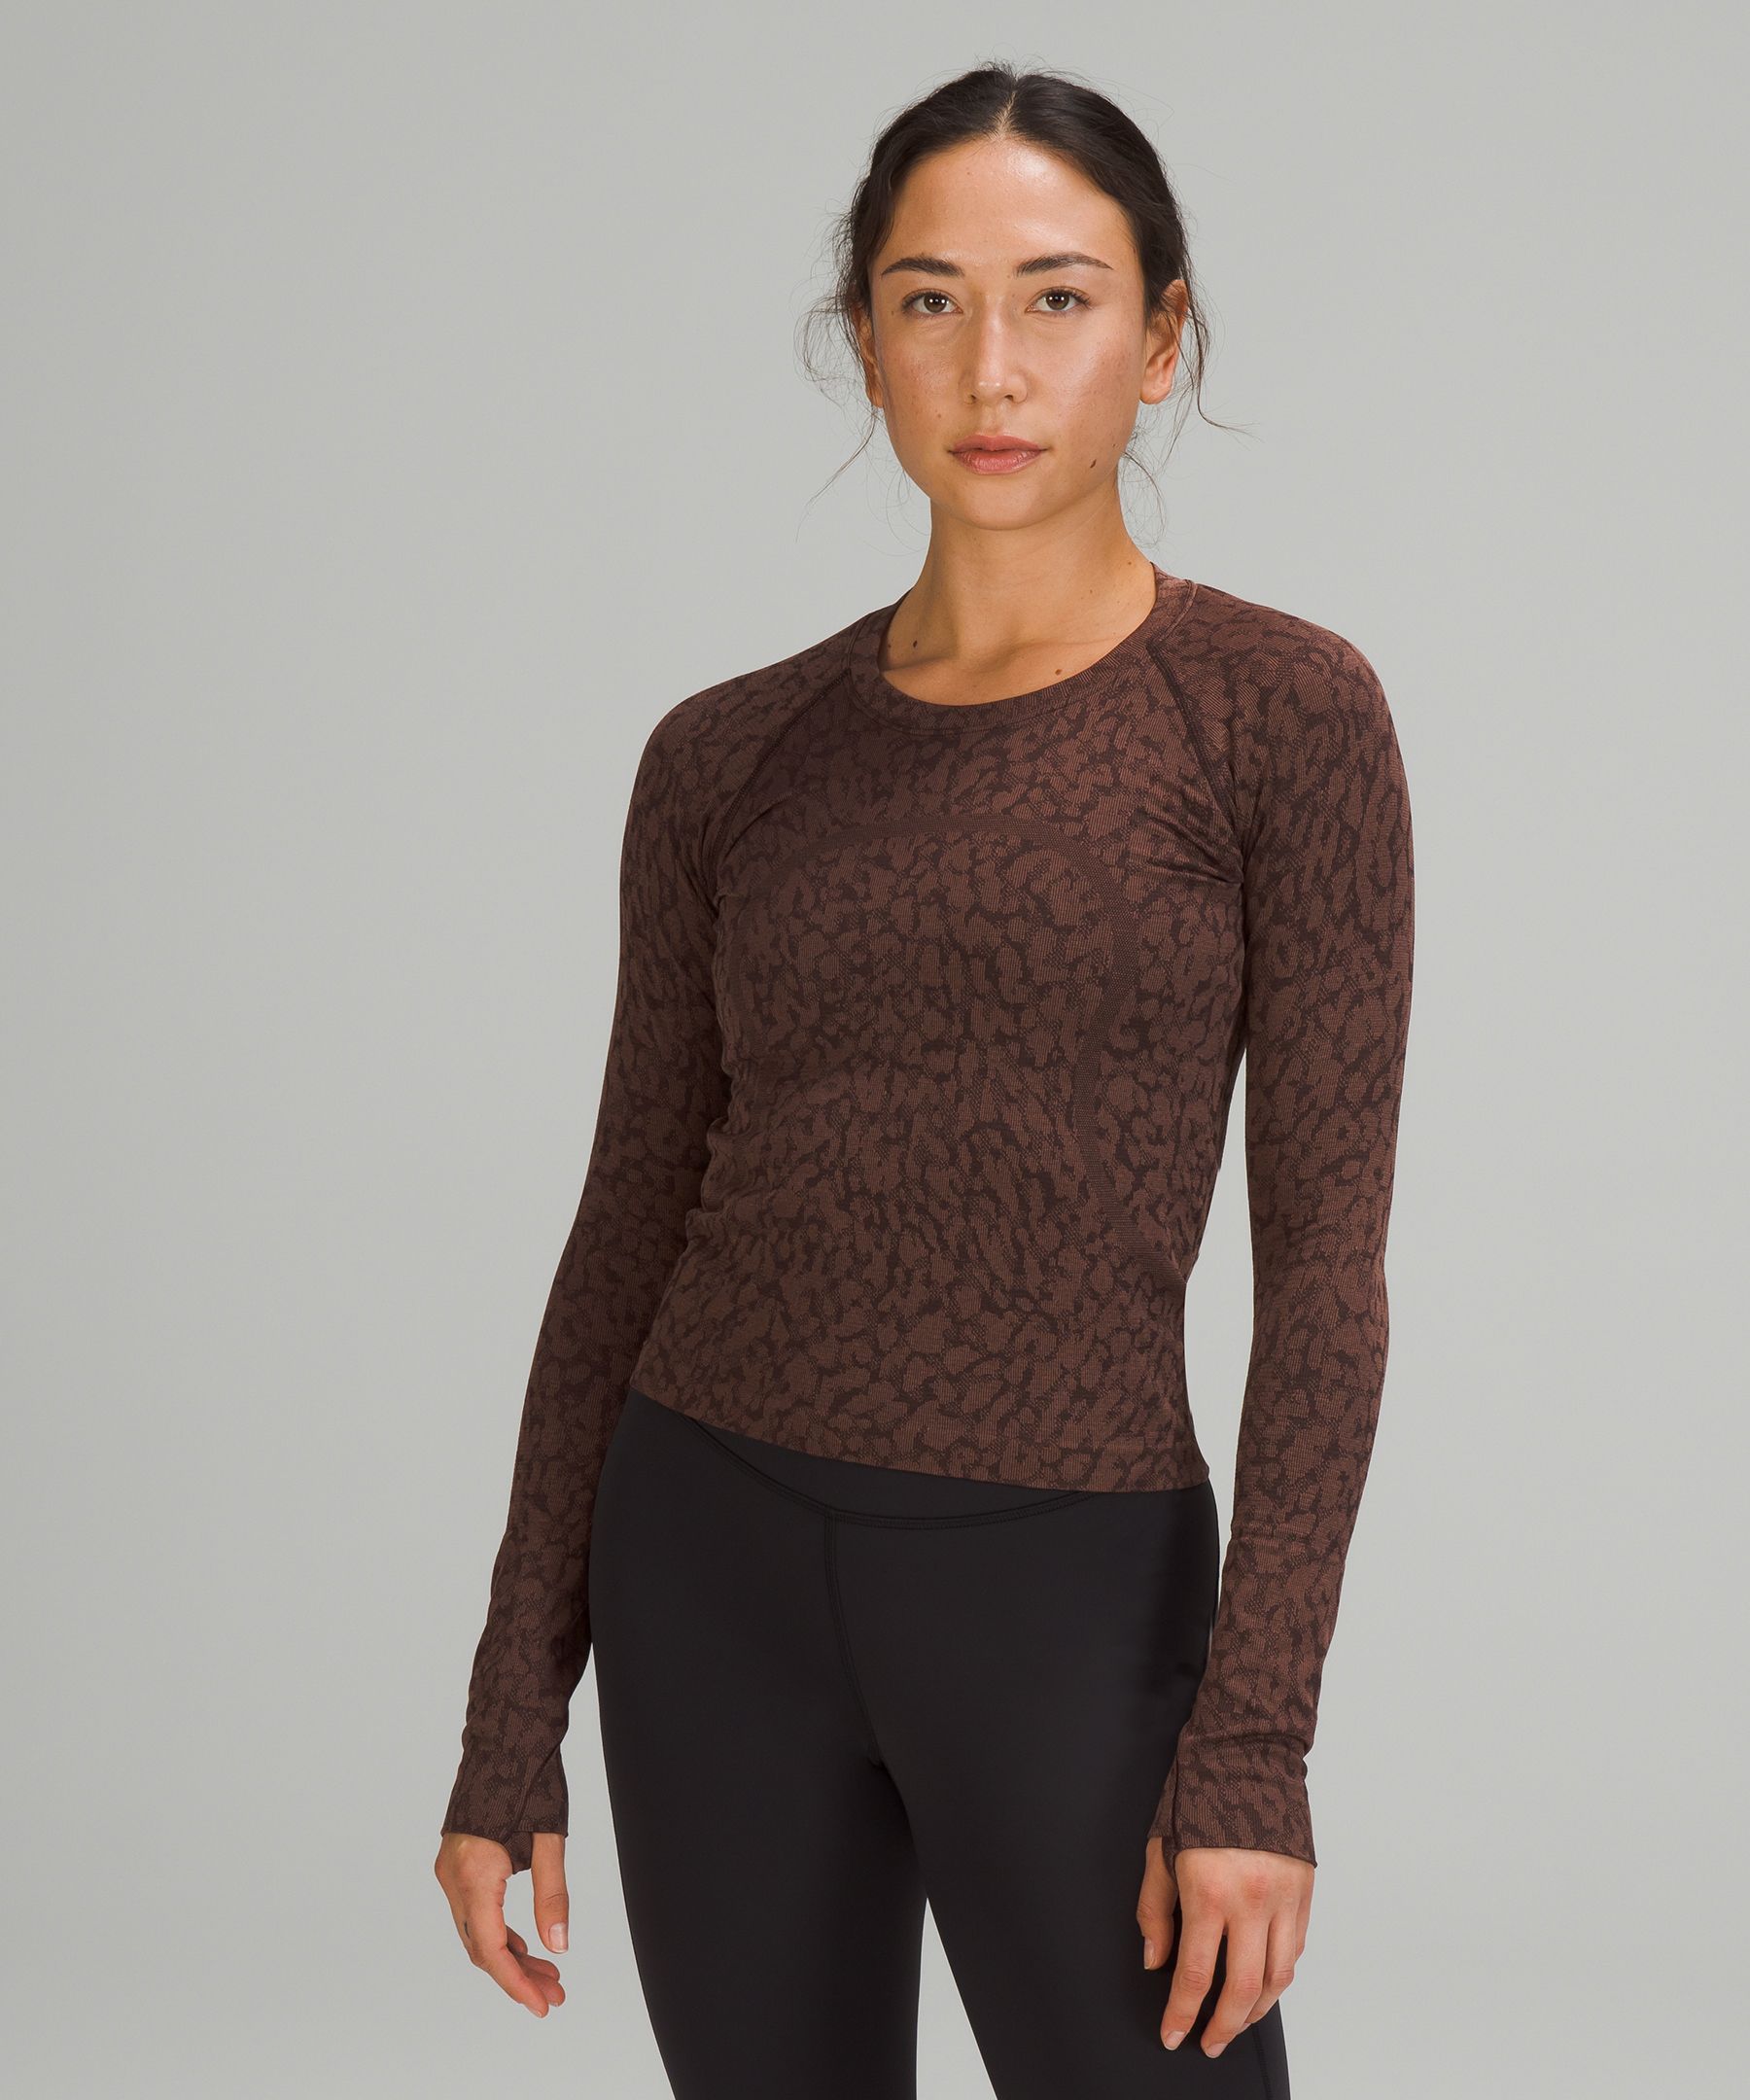 Lululemon Swiftly Tech Long Sleeve Shirt 2.0 Race Length In Particolour French Press/smoky Topaz